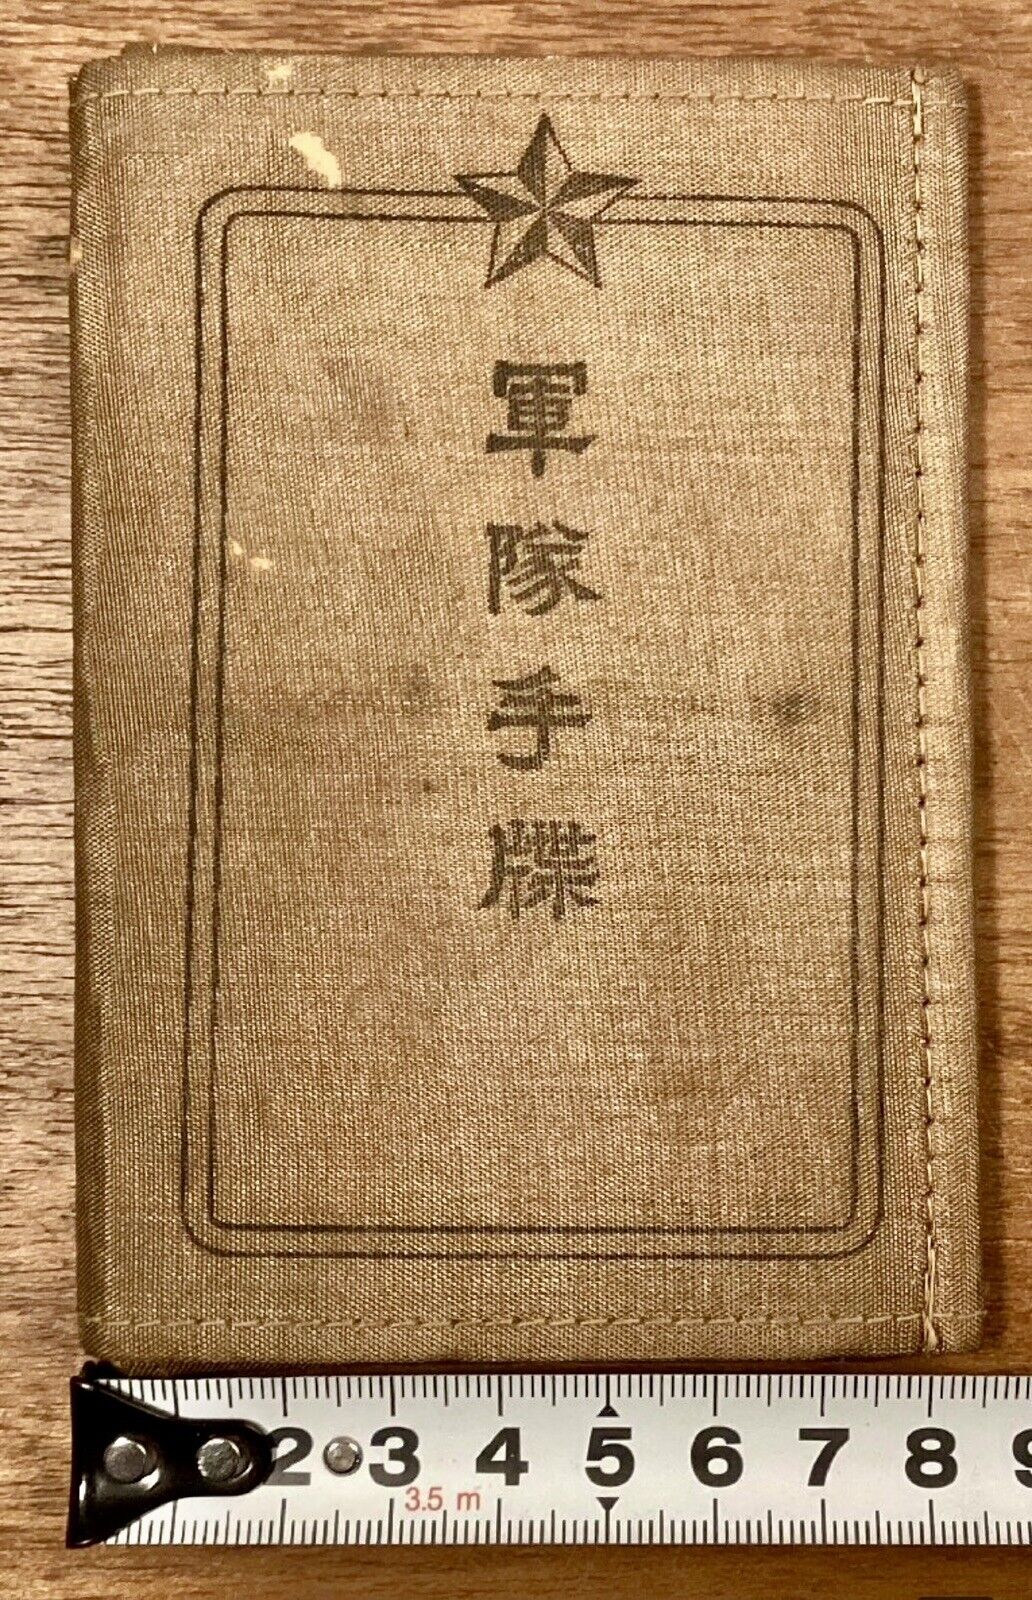 Authentic military notebook of Japanese soldiers